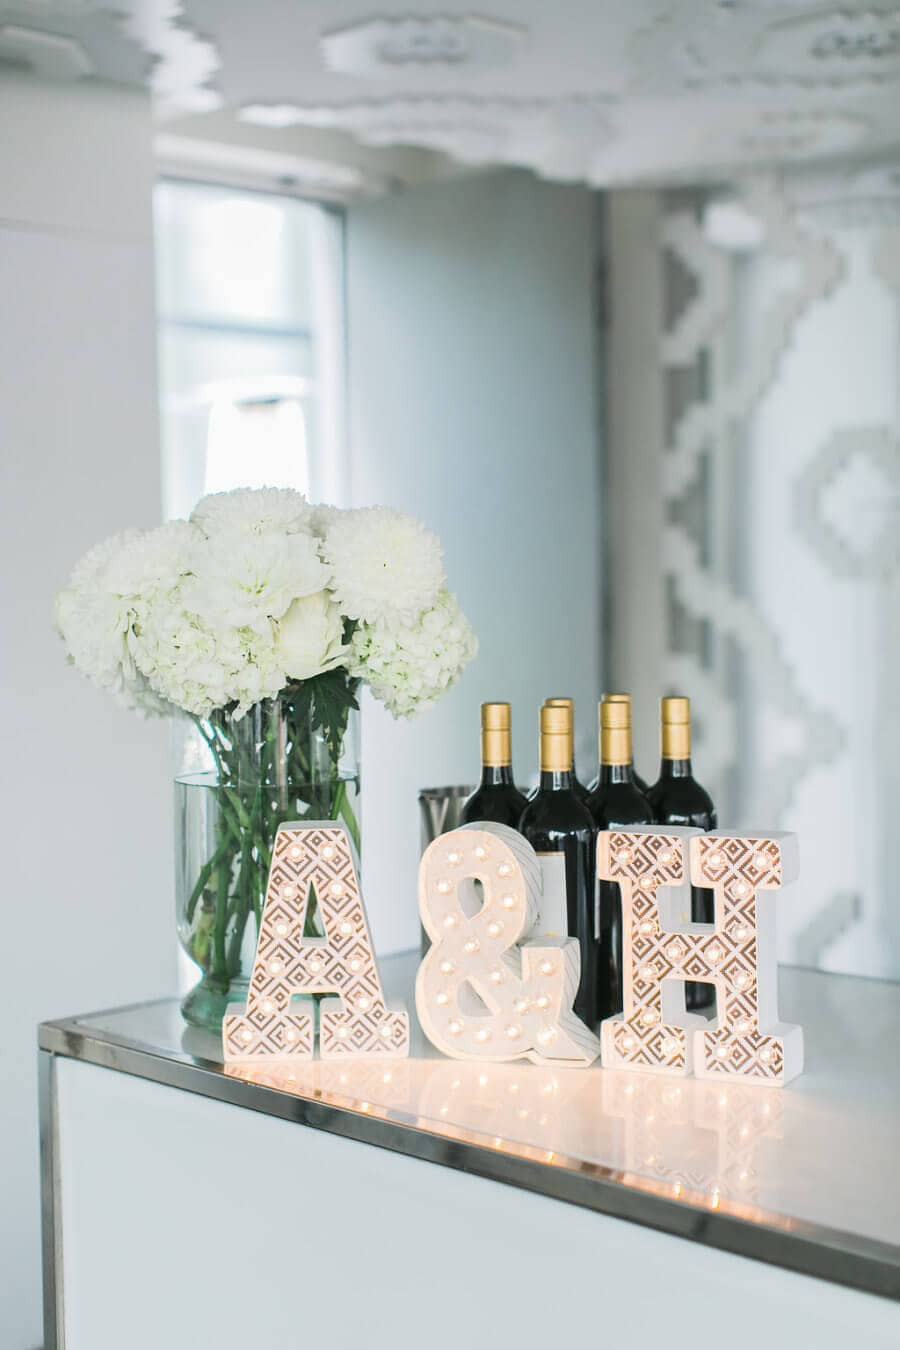 Engagement Party Themes And Ideas
 25 Amazing DIY Engagement Party Decoration Ideas for 2019